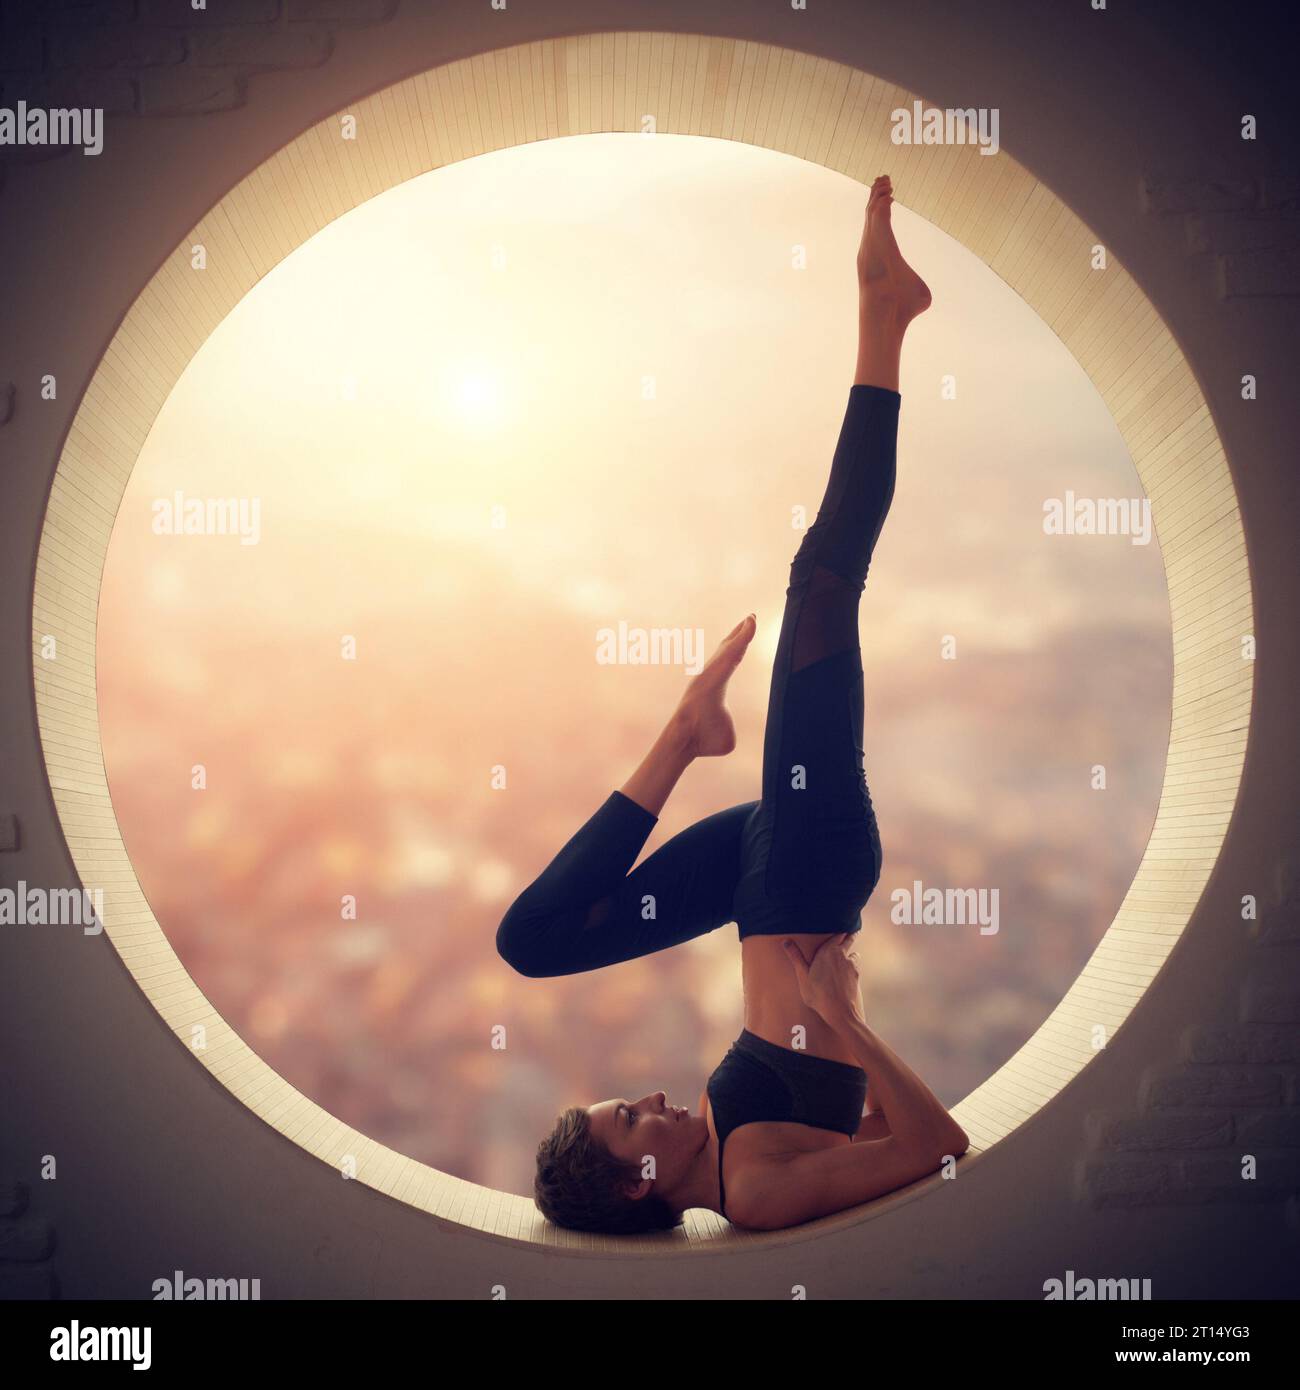 Beautiful sporty fit yogi woman practices yoga handstand asana Salamba Sarvangasana - shoulderstand pose in a round window with arial view of the city Stock Photo